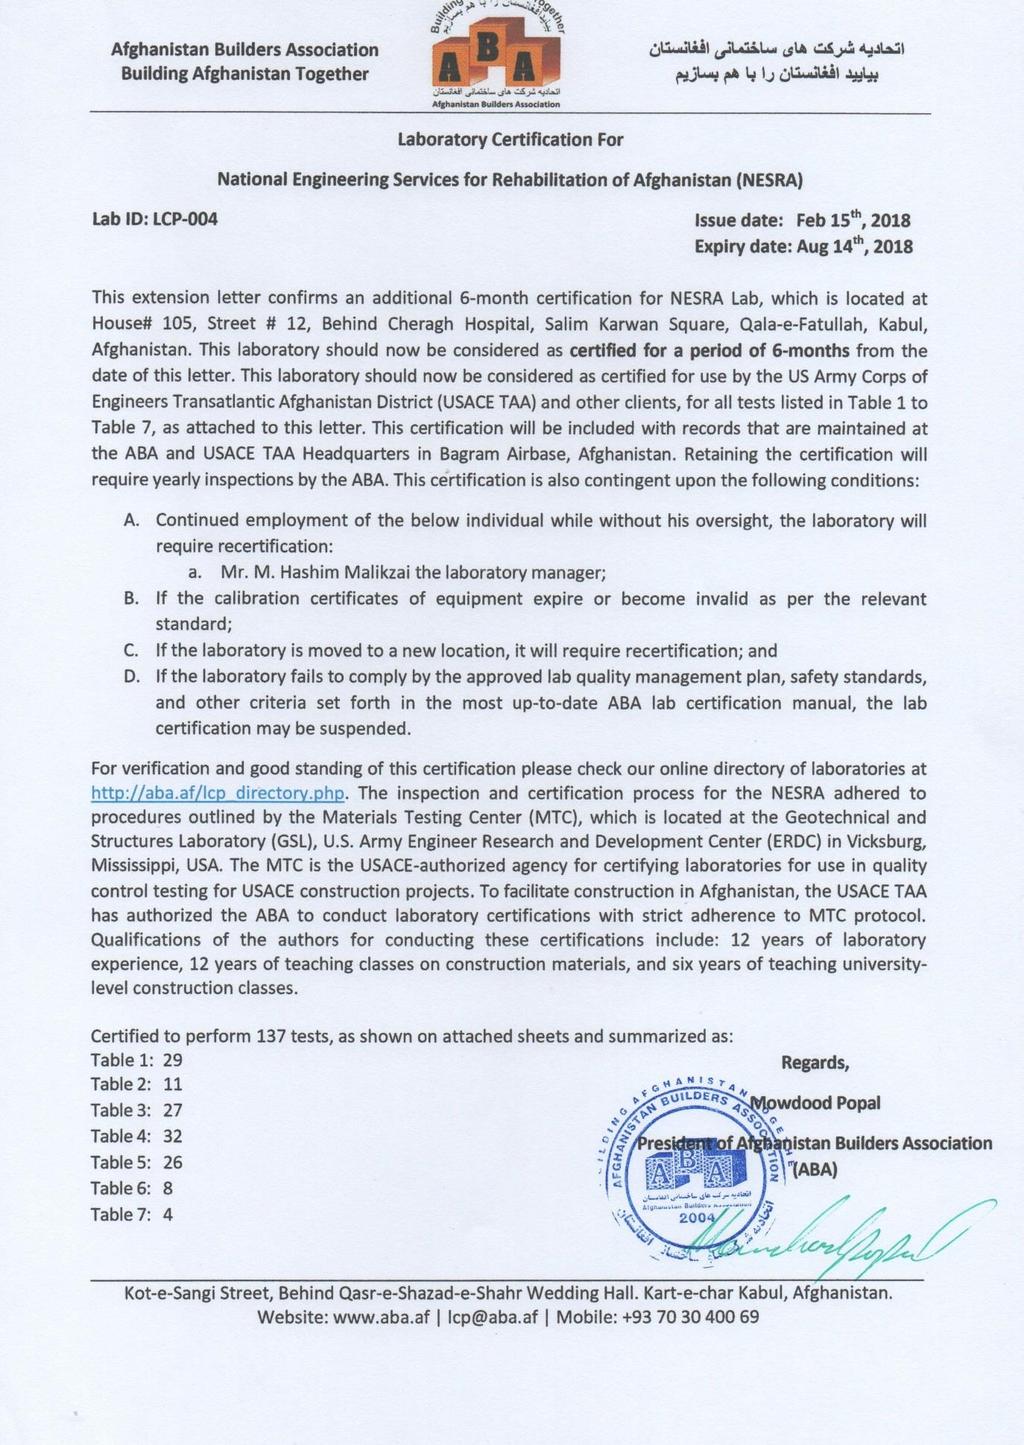 Laboratory Certification For National Engineering Services for Rehabilitation of Afghanistan (NESRA) Lab ID: LCP-004 Issue date: Feb 15 th, 2018 Expiry date: Aug 14 th, 2018 This extension letter